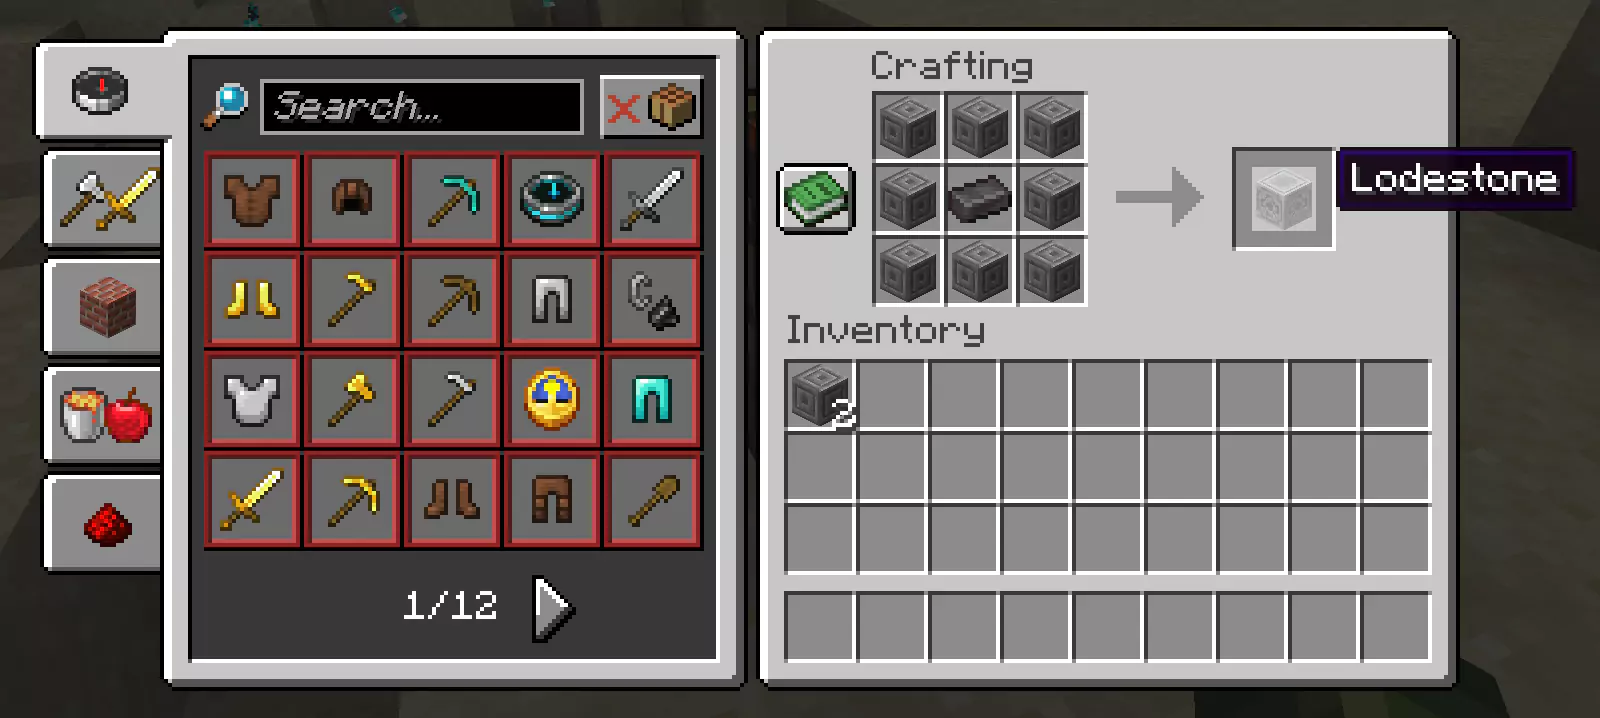 The Crafting recipe for a Lodestone in Minecraft.